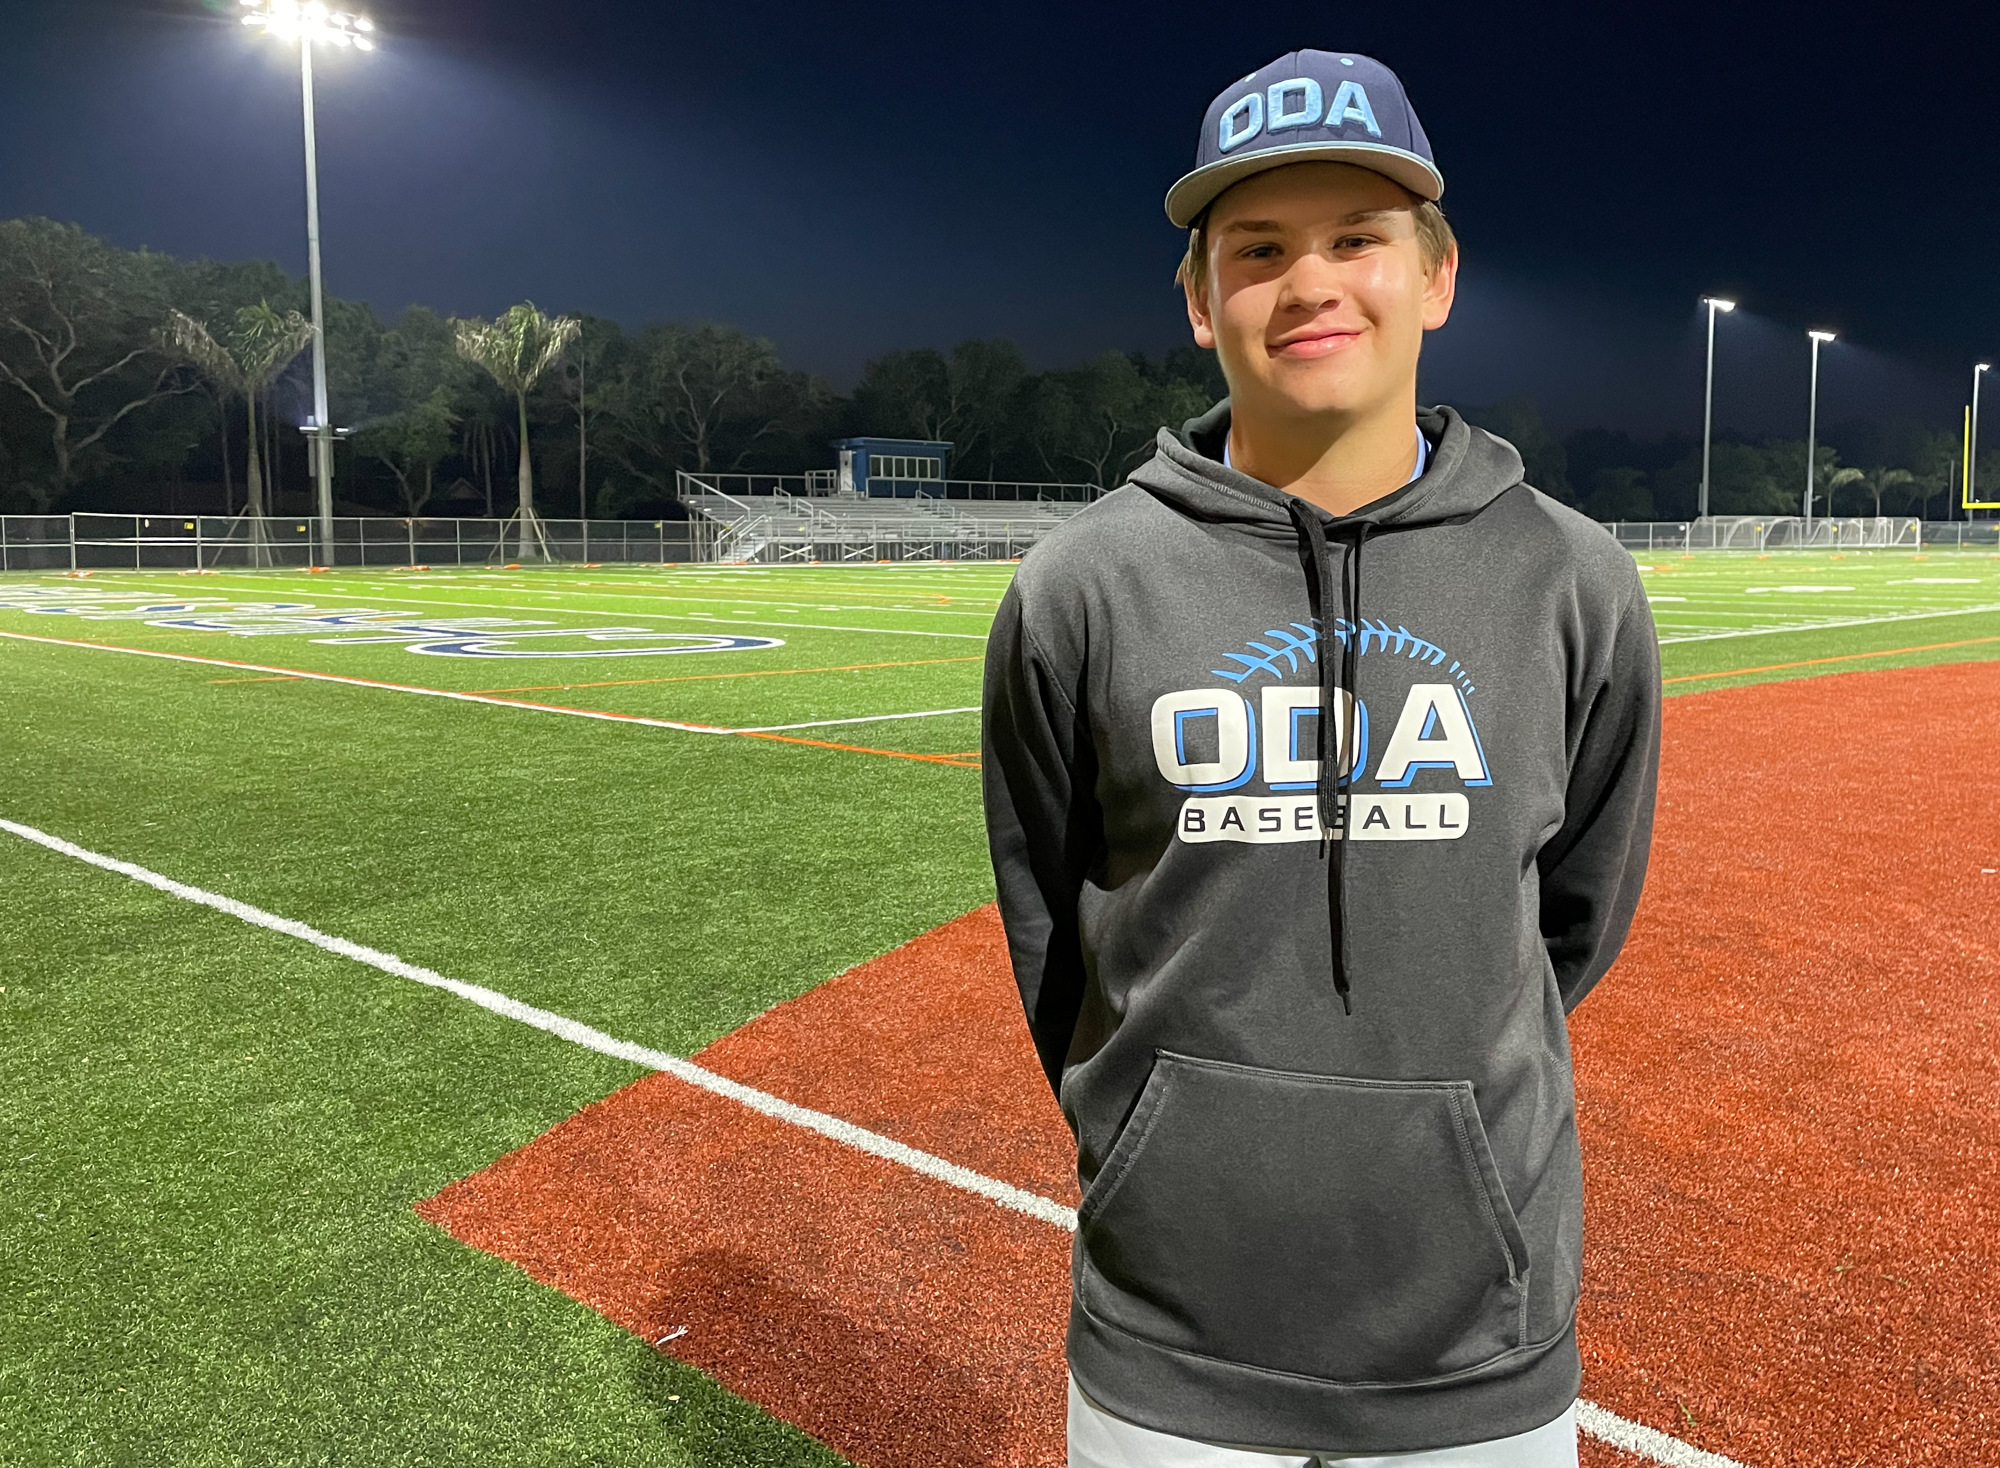 Luke Geske, a sophomore at ODA, has committed to the University of Miami.